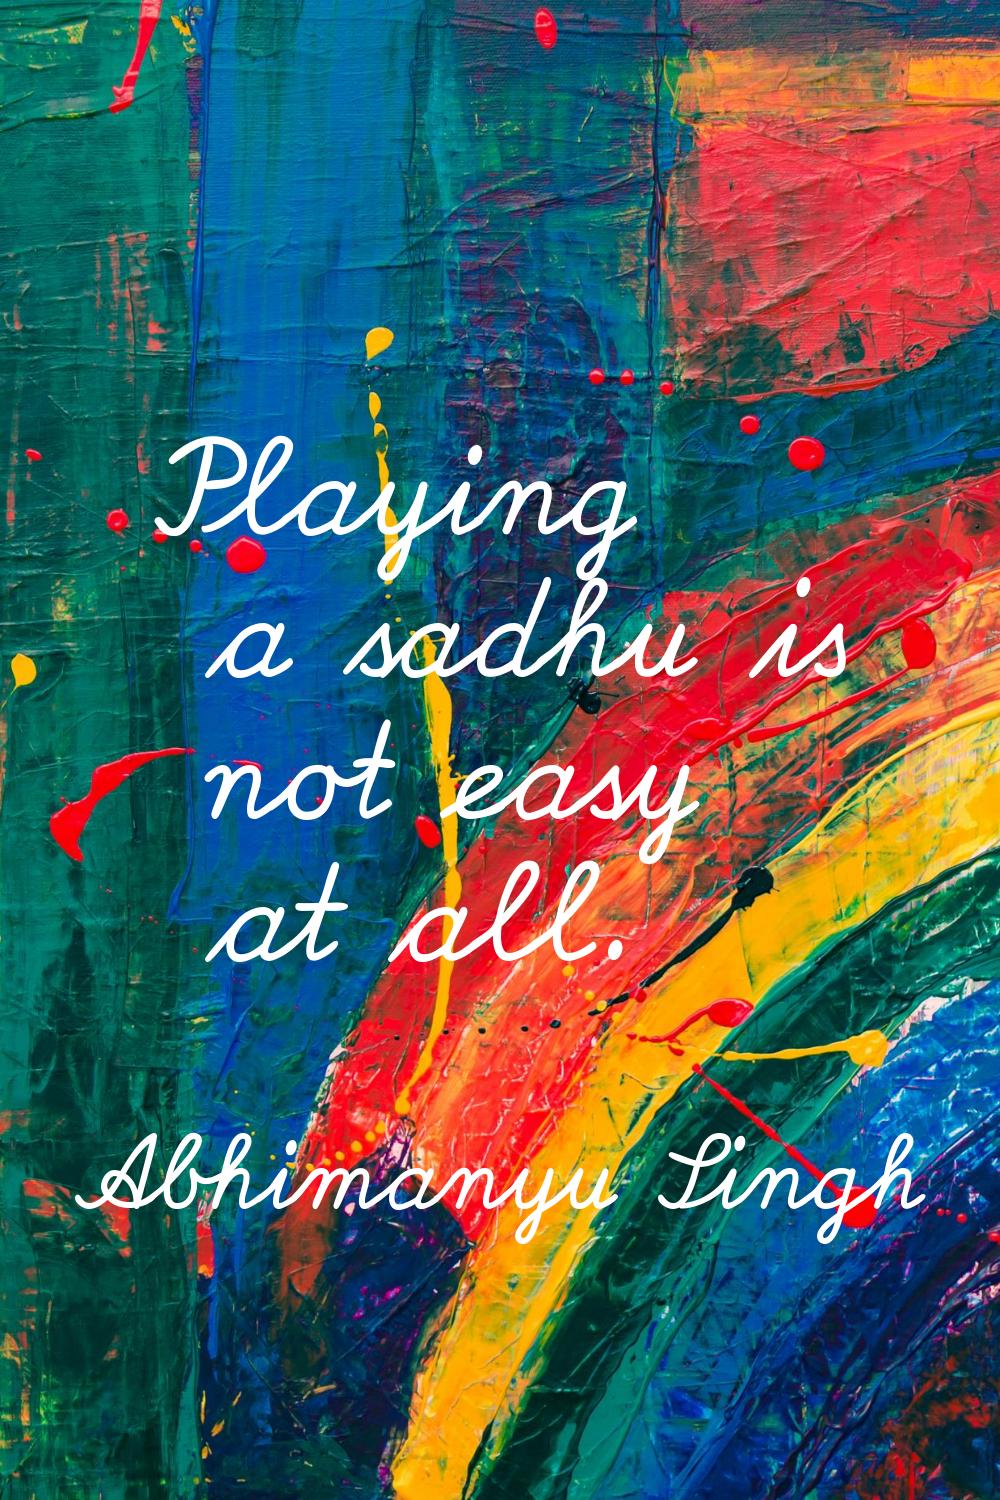 Playing a sadhu is not easy at all.